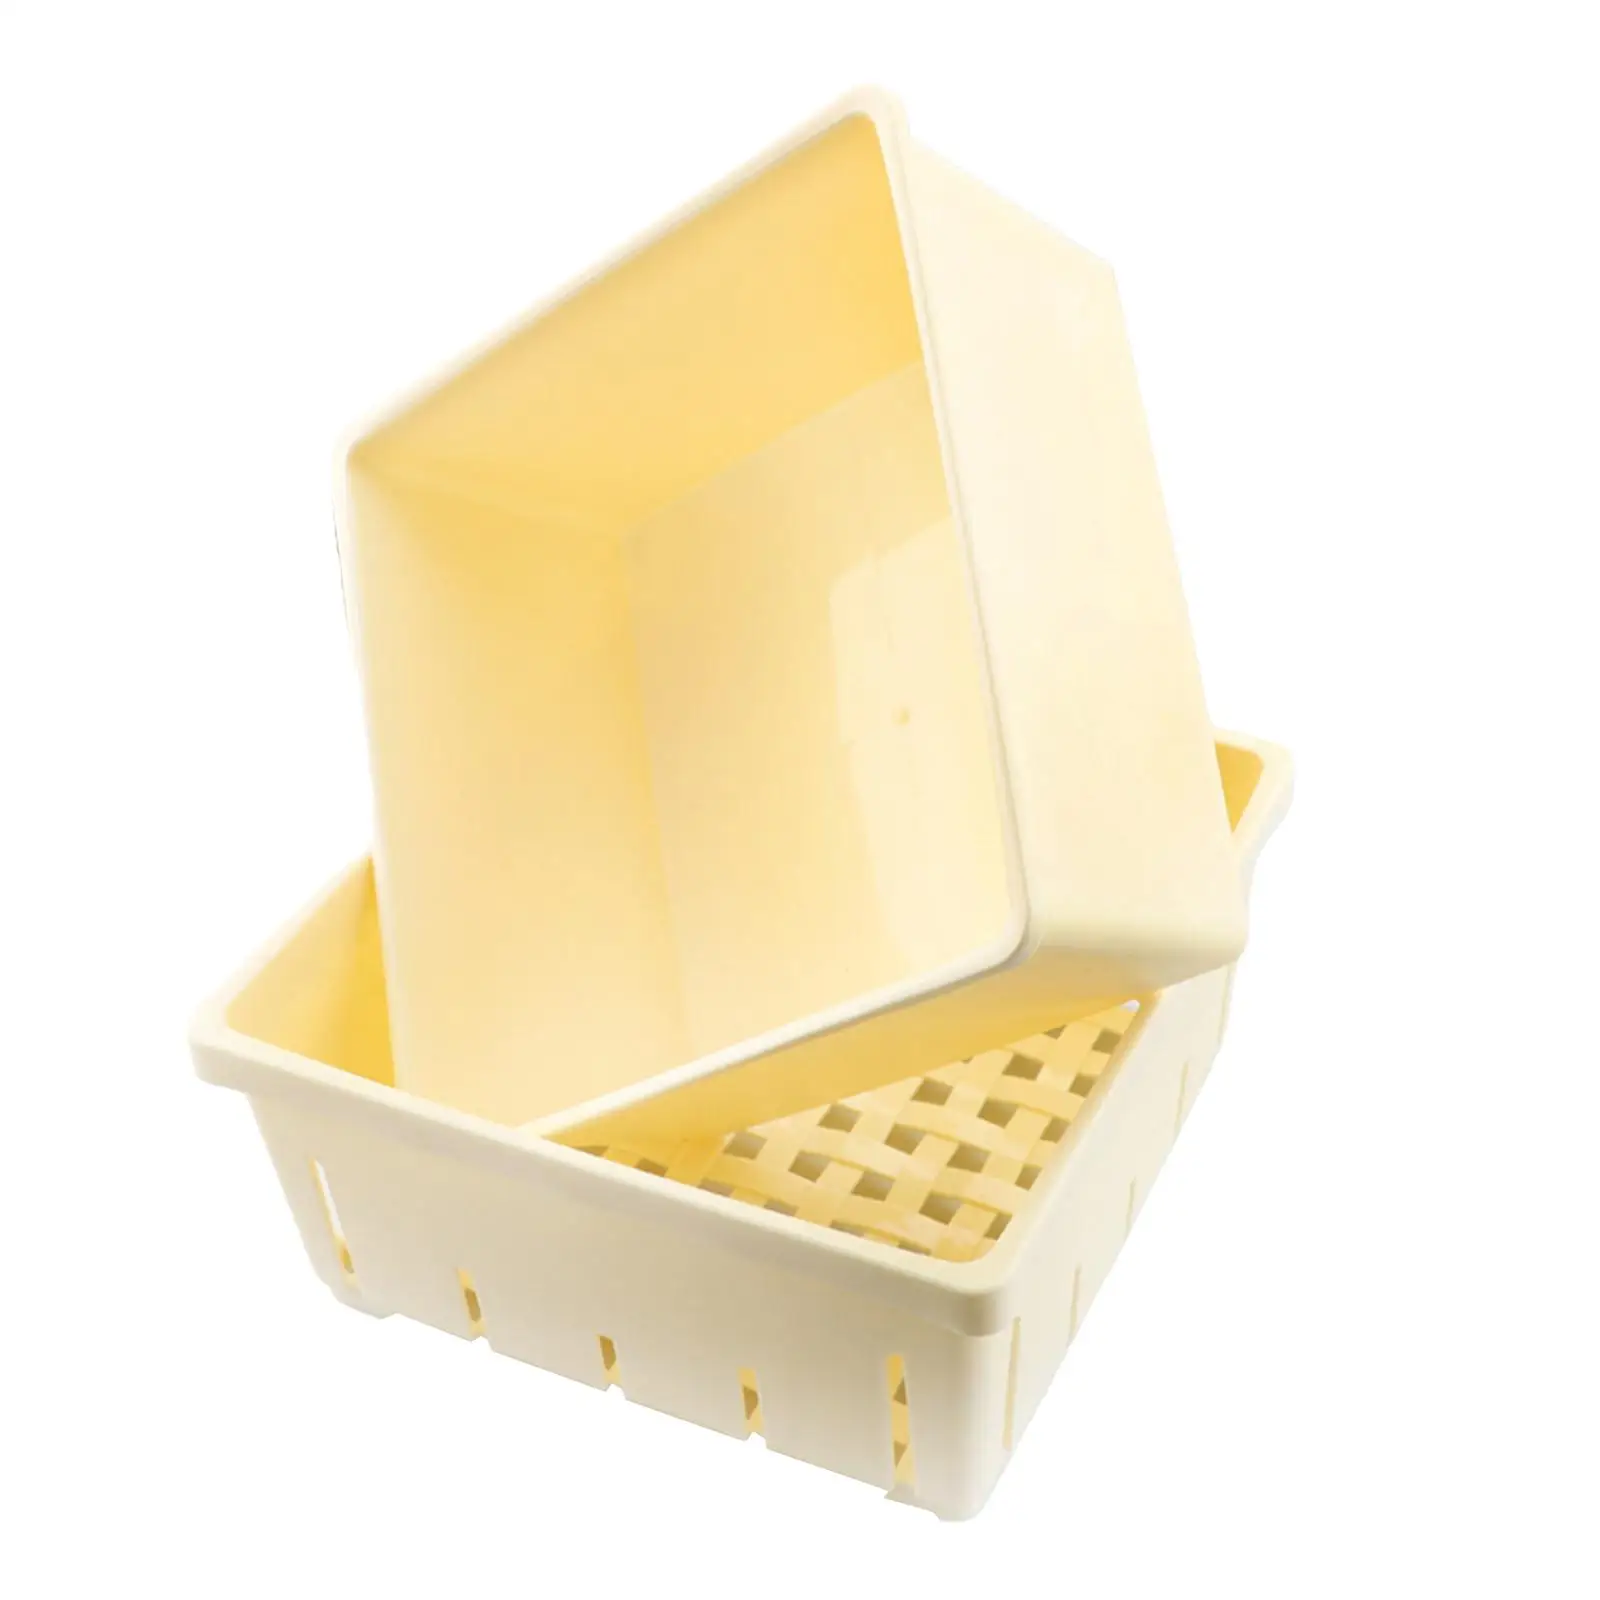 DIY Tofu Press Mould Easily Remove Water Manual Tool Soybean Curd Making Machine Portable Kitchen Utensils for Home Use Cheese